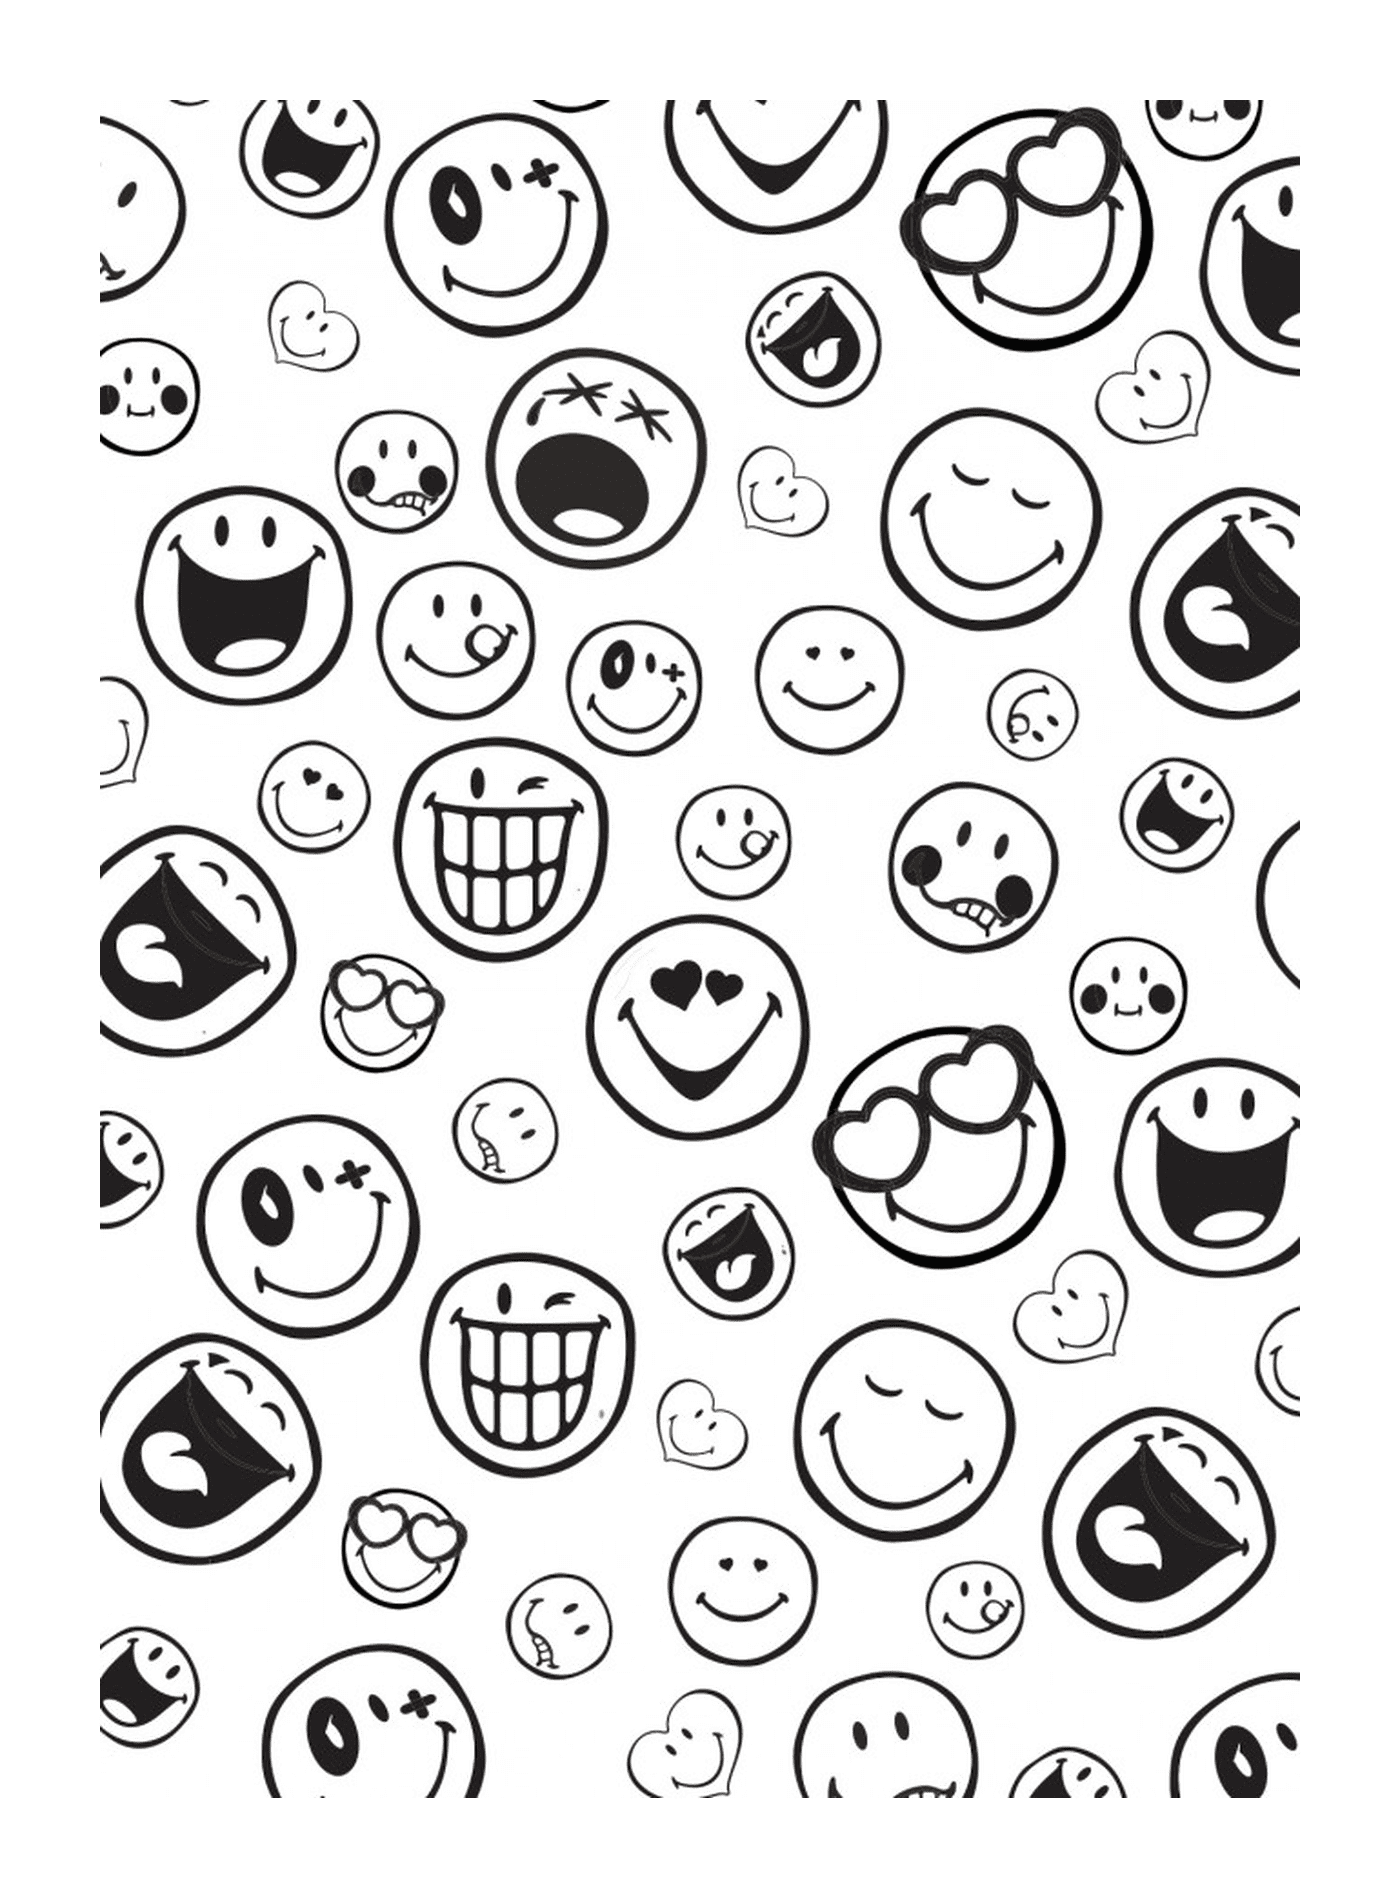  Group of smileys 